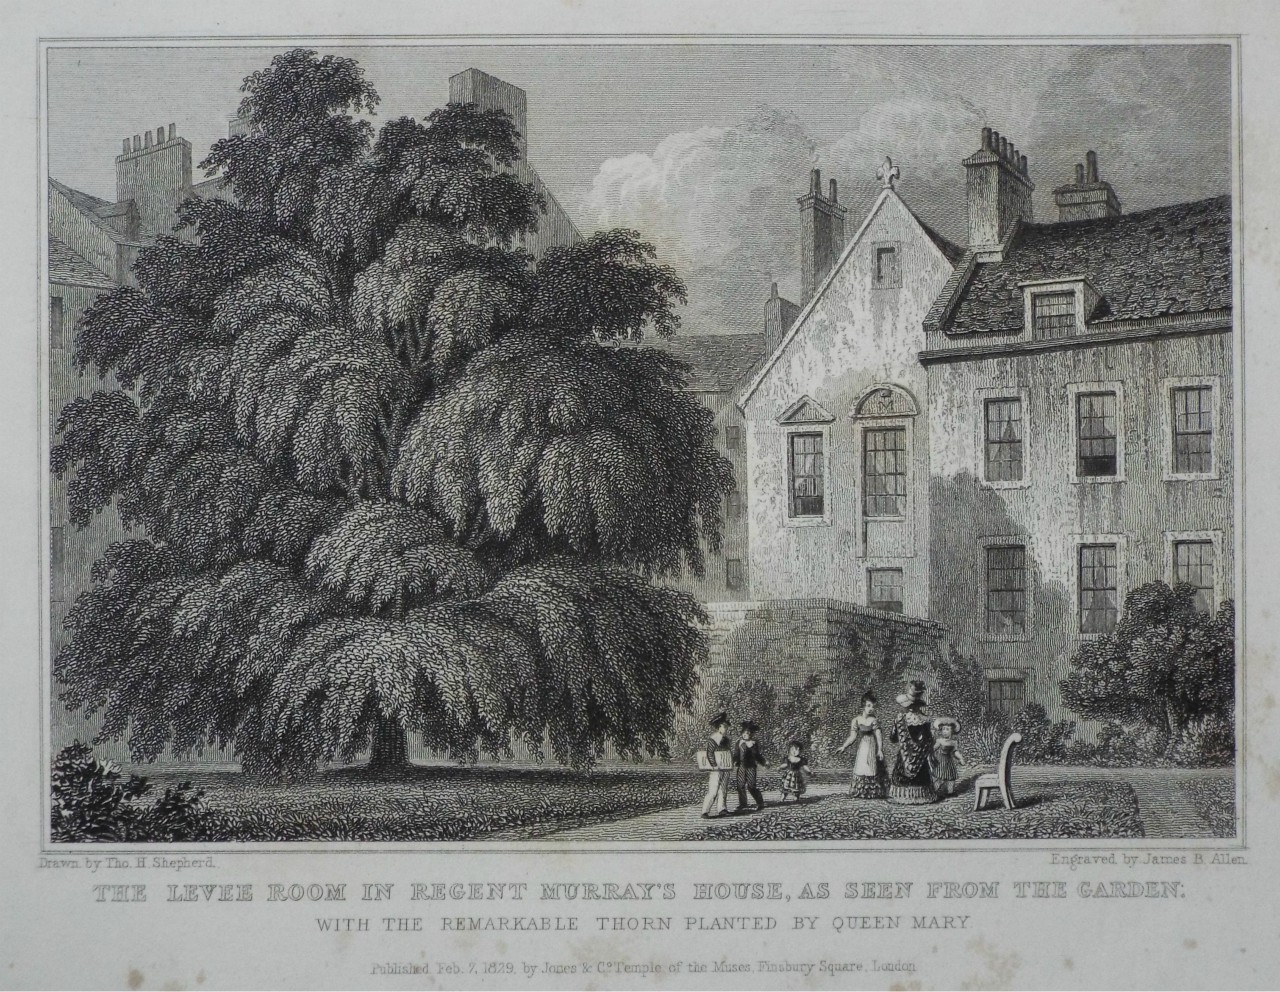 Print - The Levee Room in Regent Murray's House, as seen from the Garden. Wkith the remarkable Thorn planted by Queen Mary. - Allen